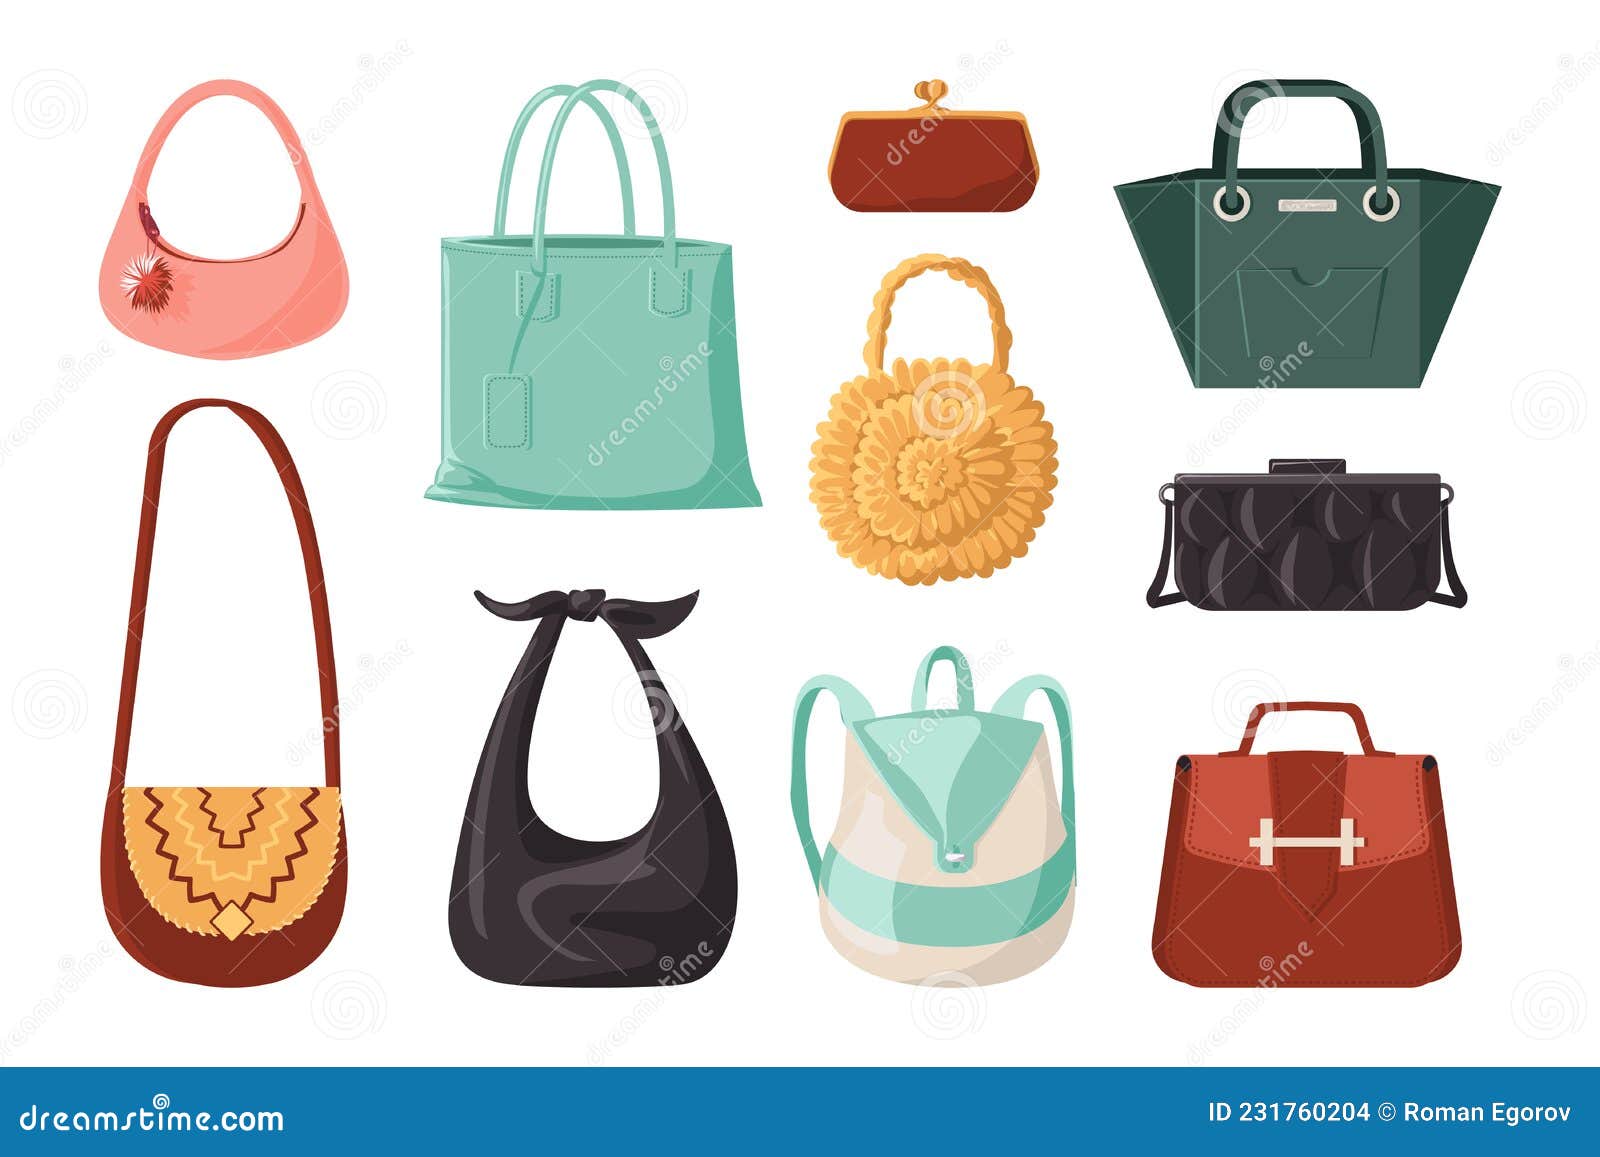 Elegant Side Bags for Girls For Stylish And Trendy Looks 